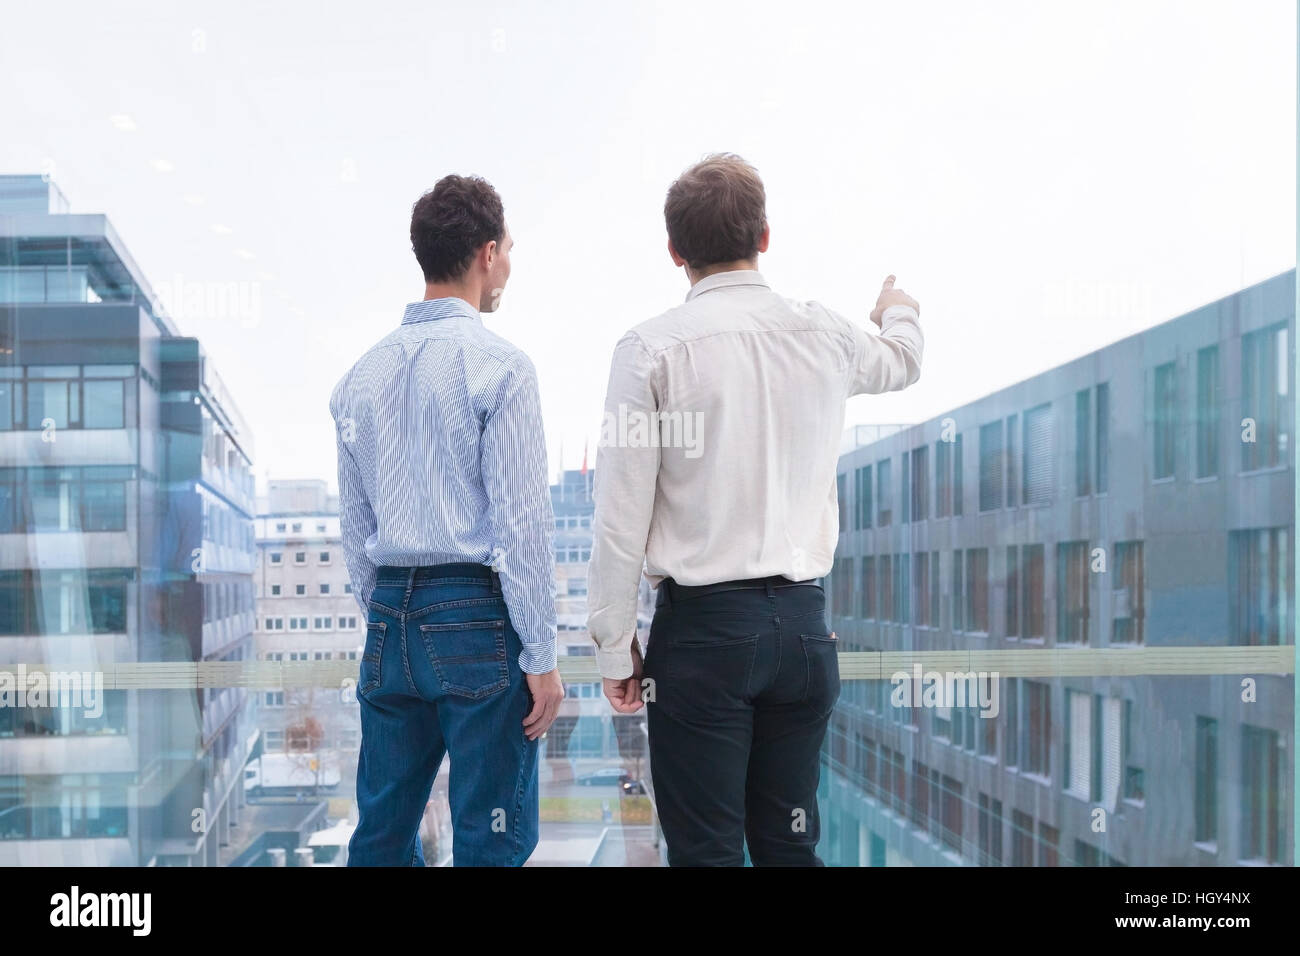 Two business people talking and looking at the horizon, one person pointing at something. Concept about projects, visions, opportunities Stock Photo